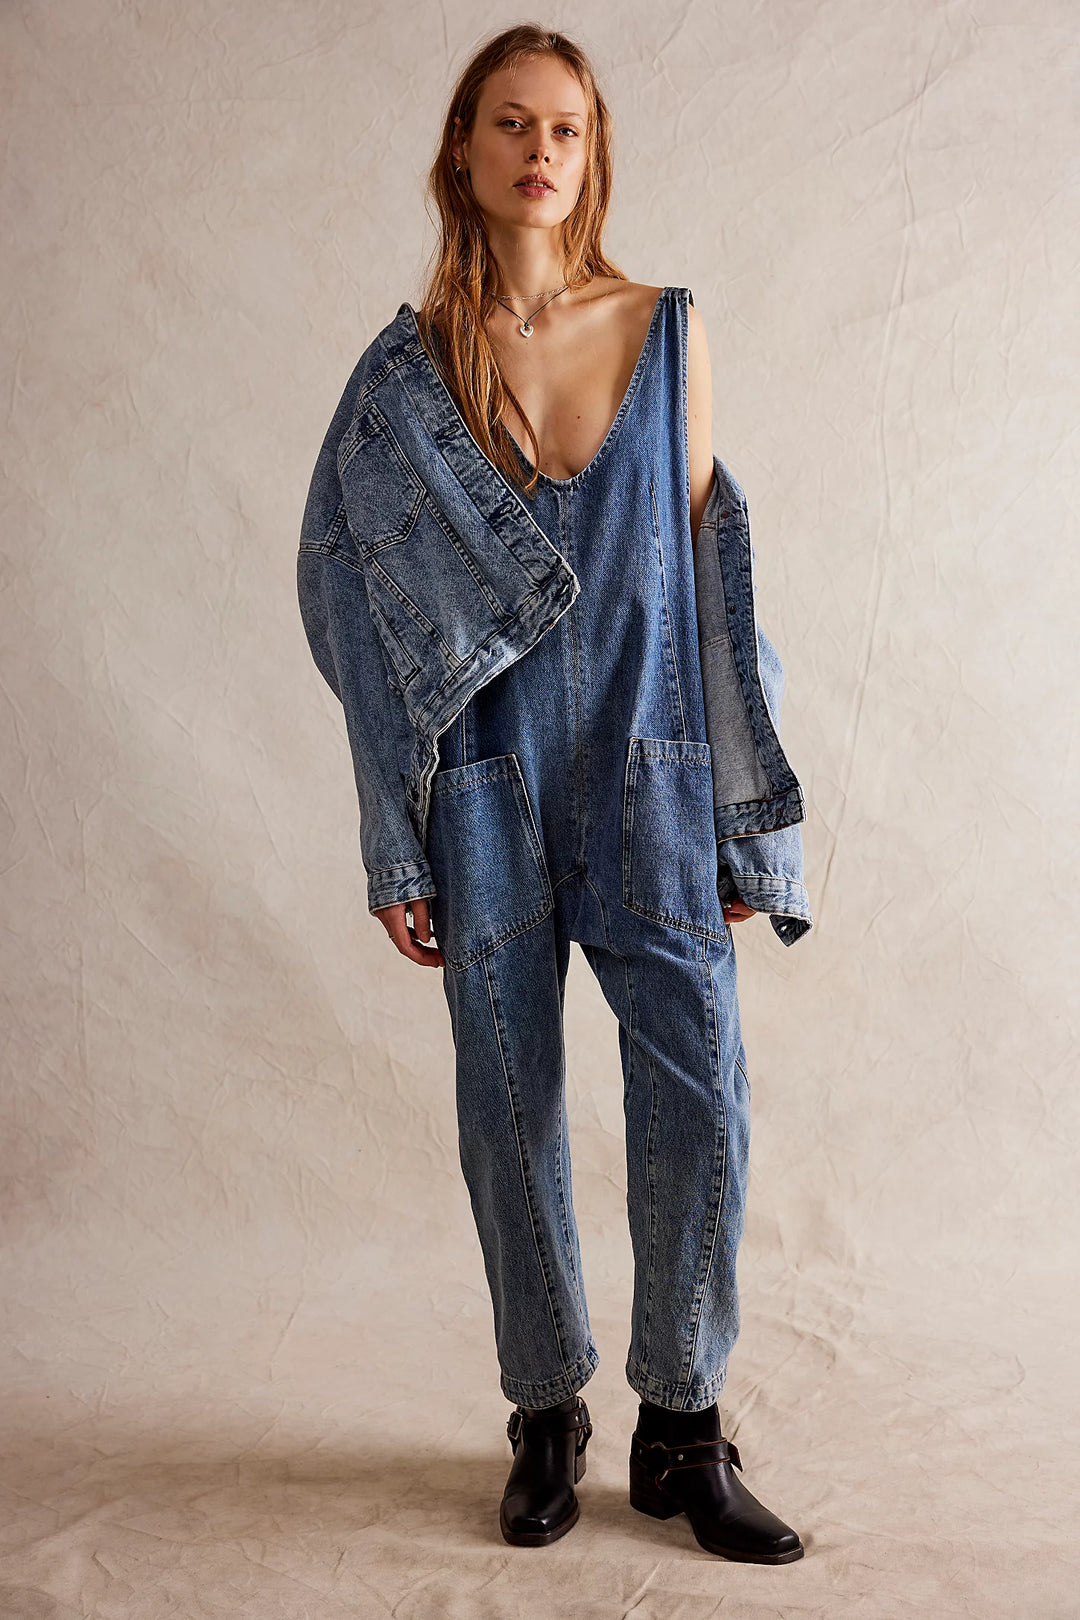 Free People We The Free High Roller Jumpsuit - Sapphire Blue - Sun Diego Boardshop